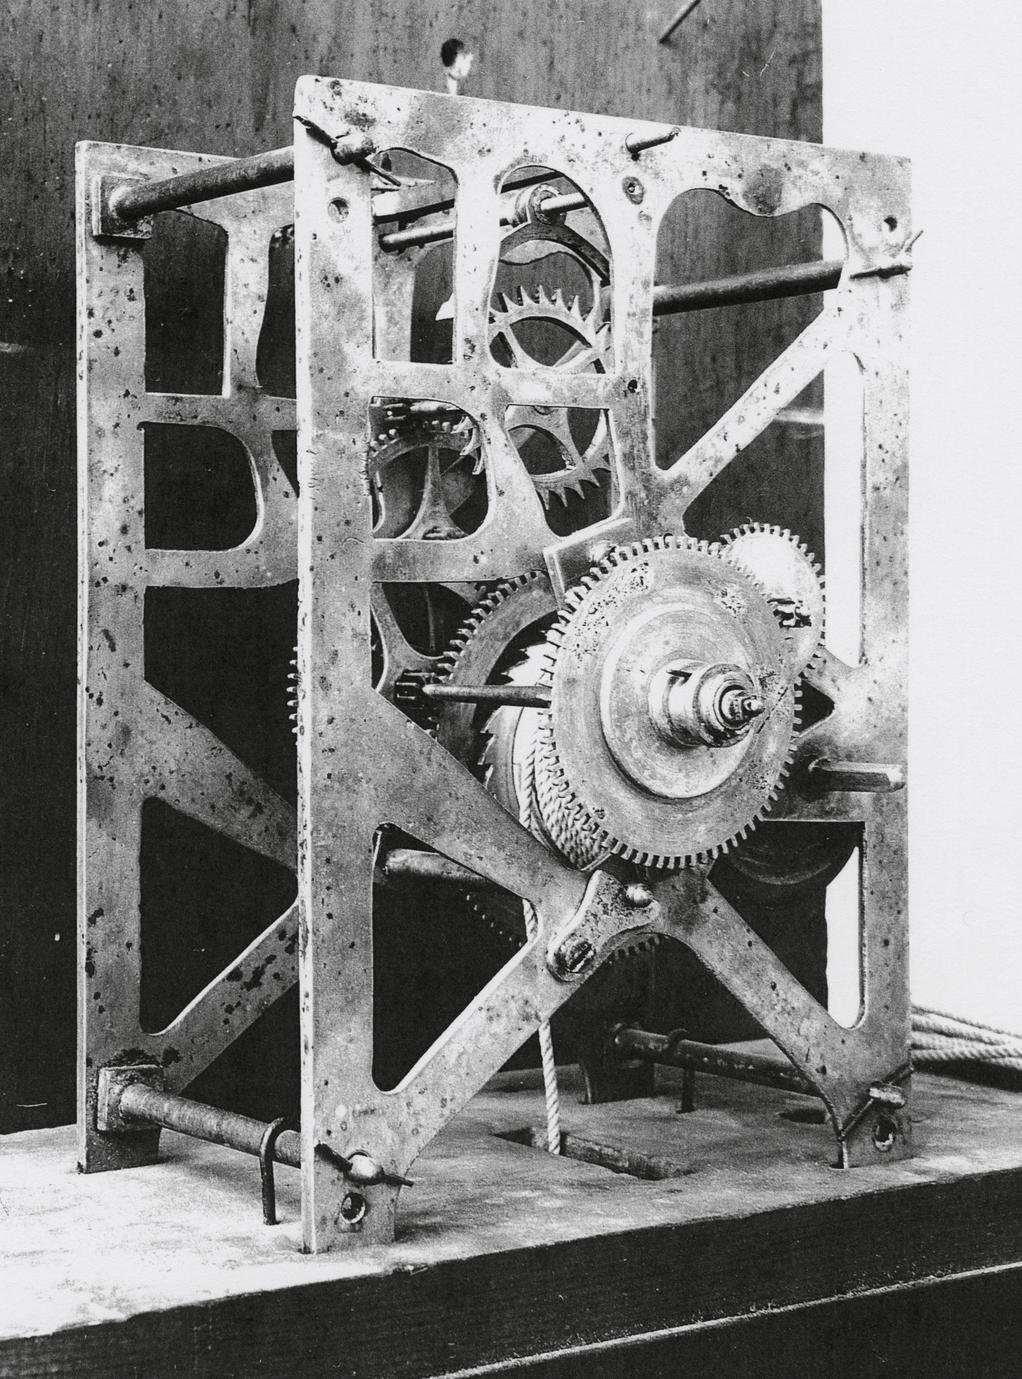 Black and white photograph of a silent clock gear system.